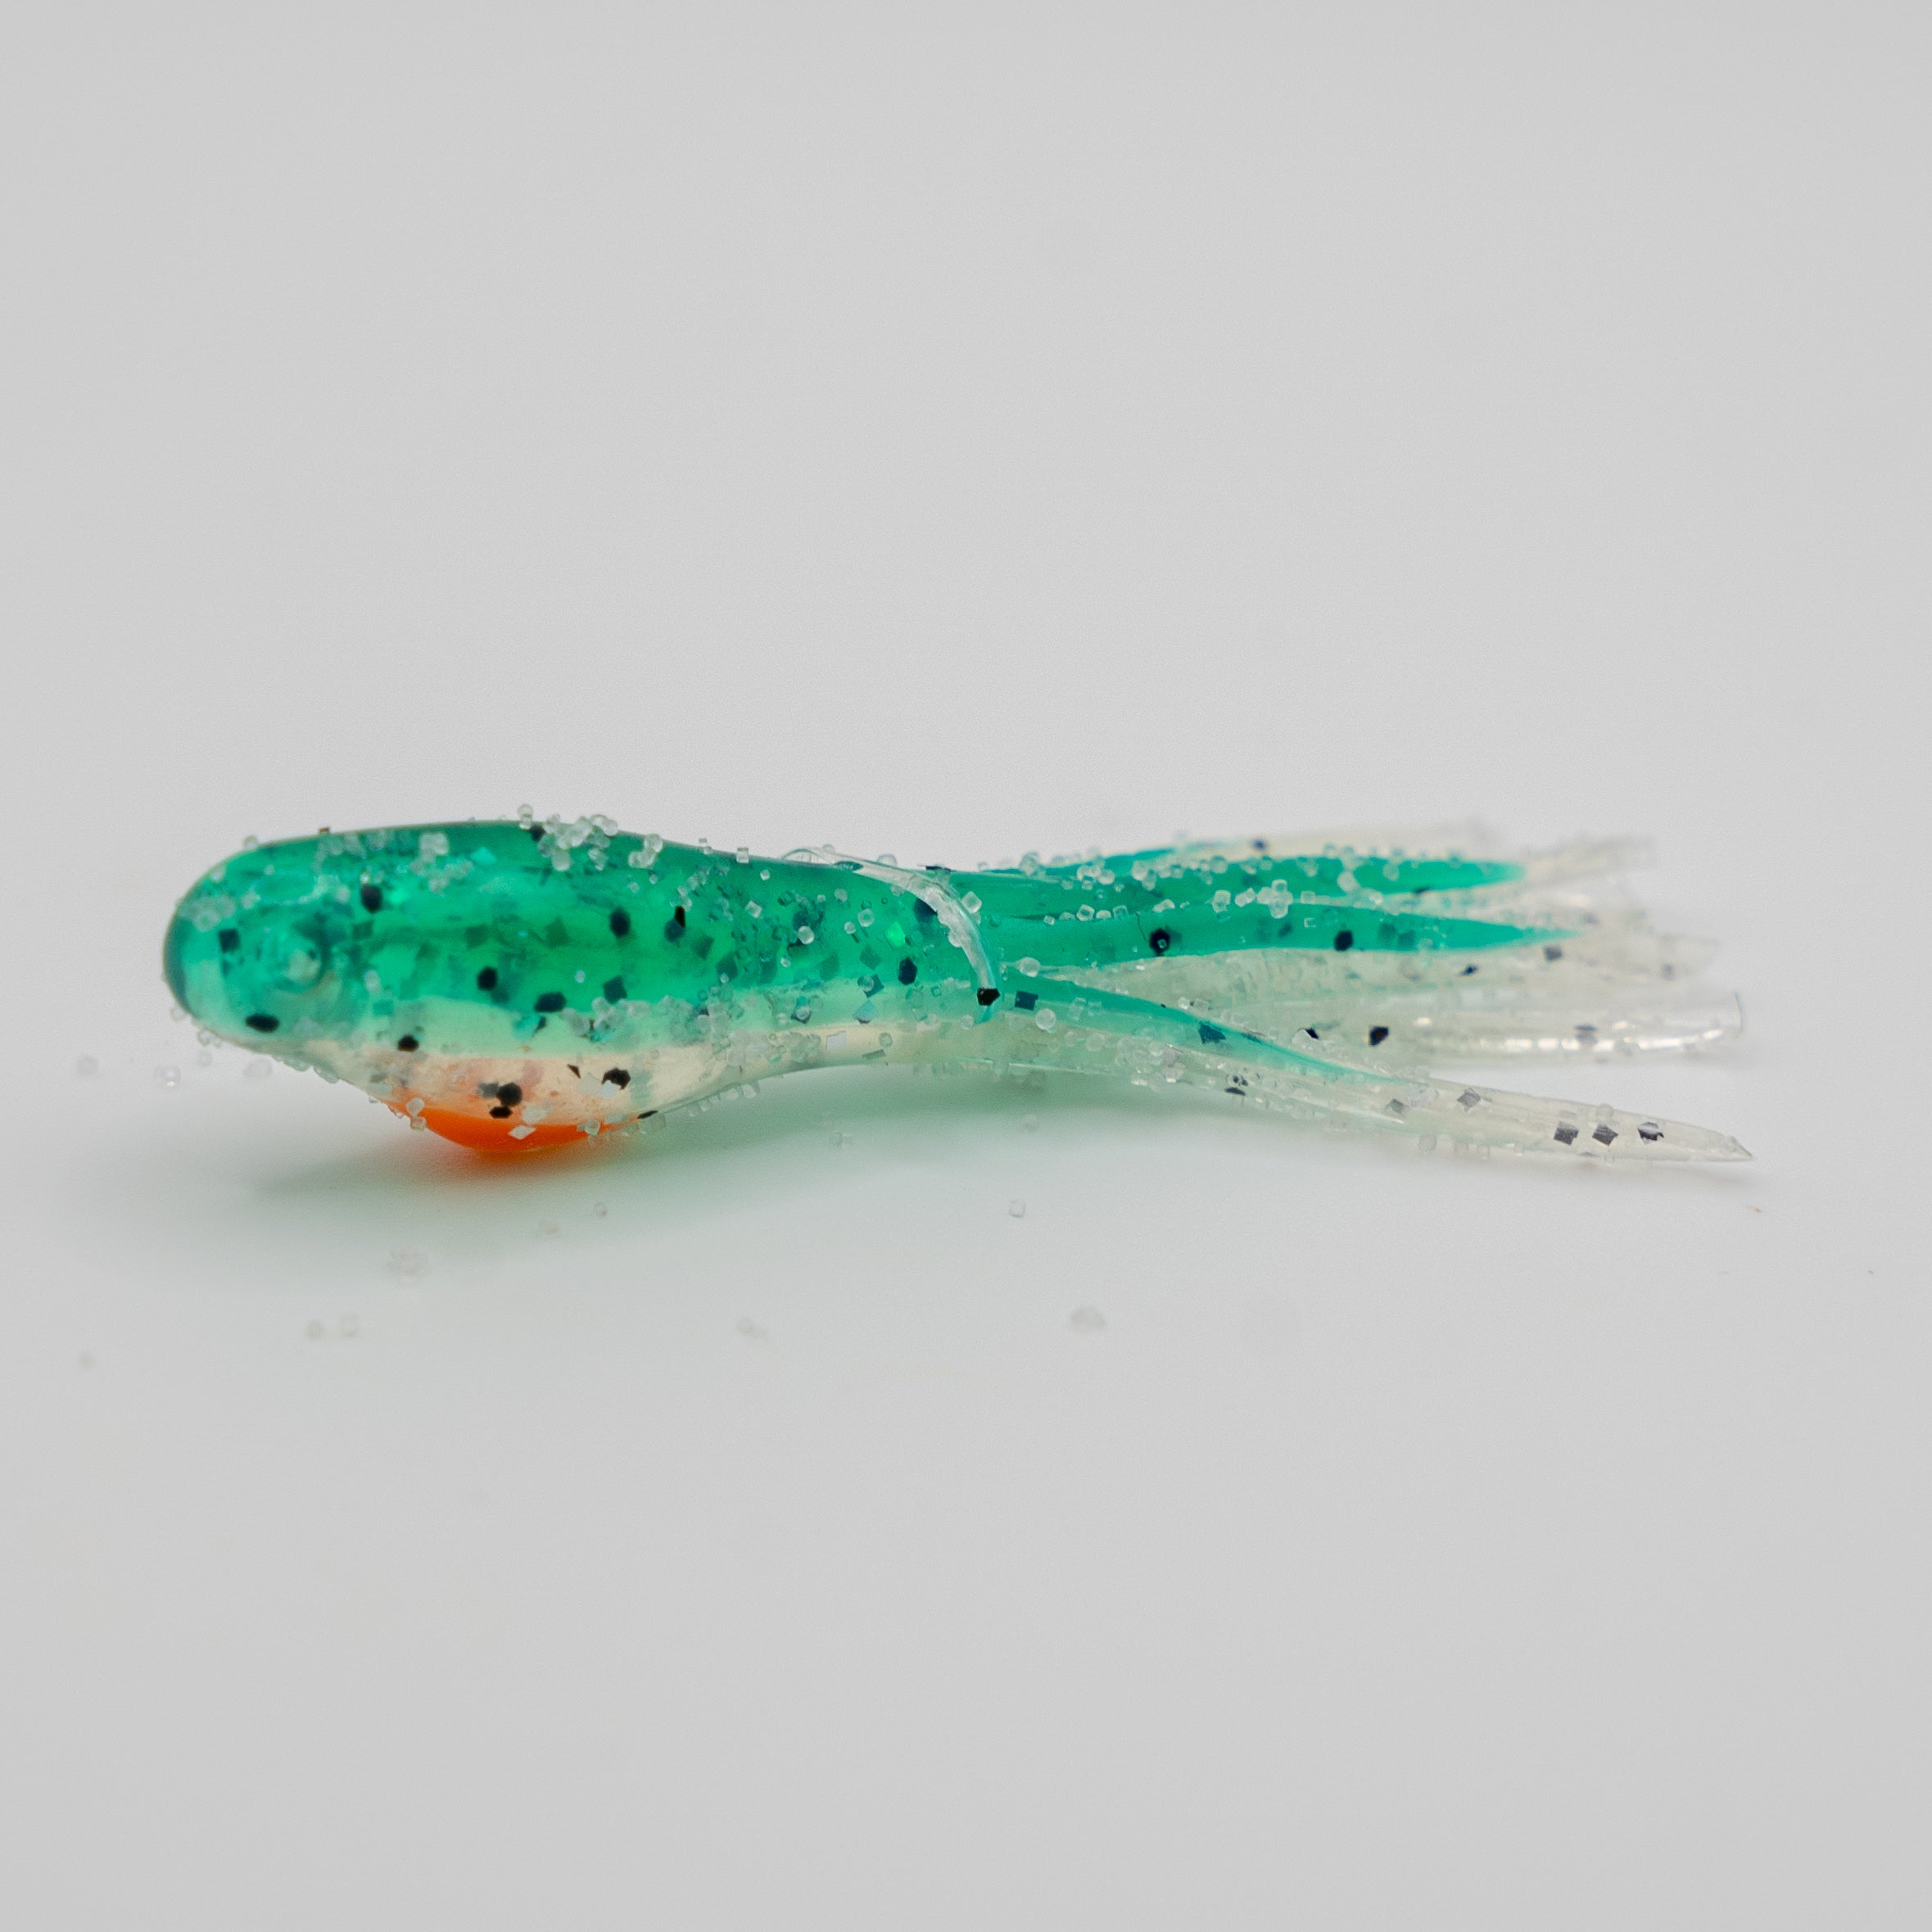 Magz Minnow Tubes in Hot Tiger color and size 2" - 8/pkg